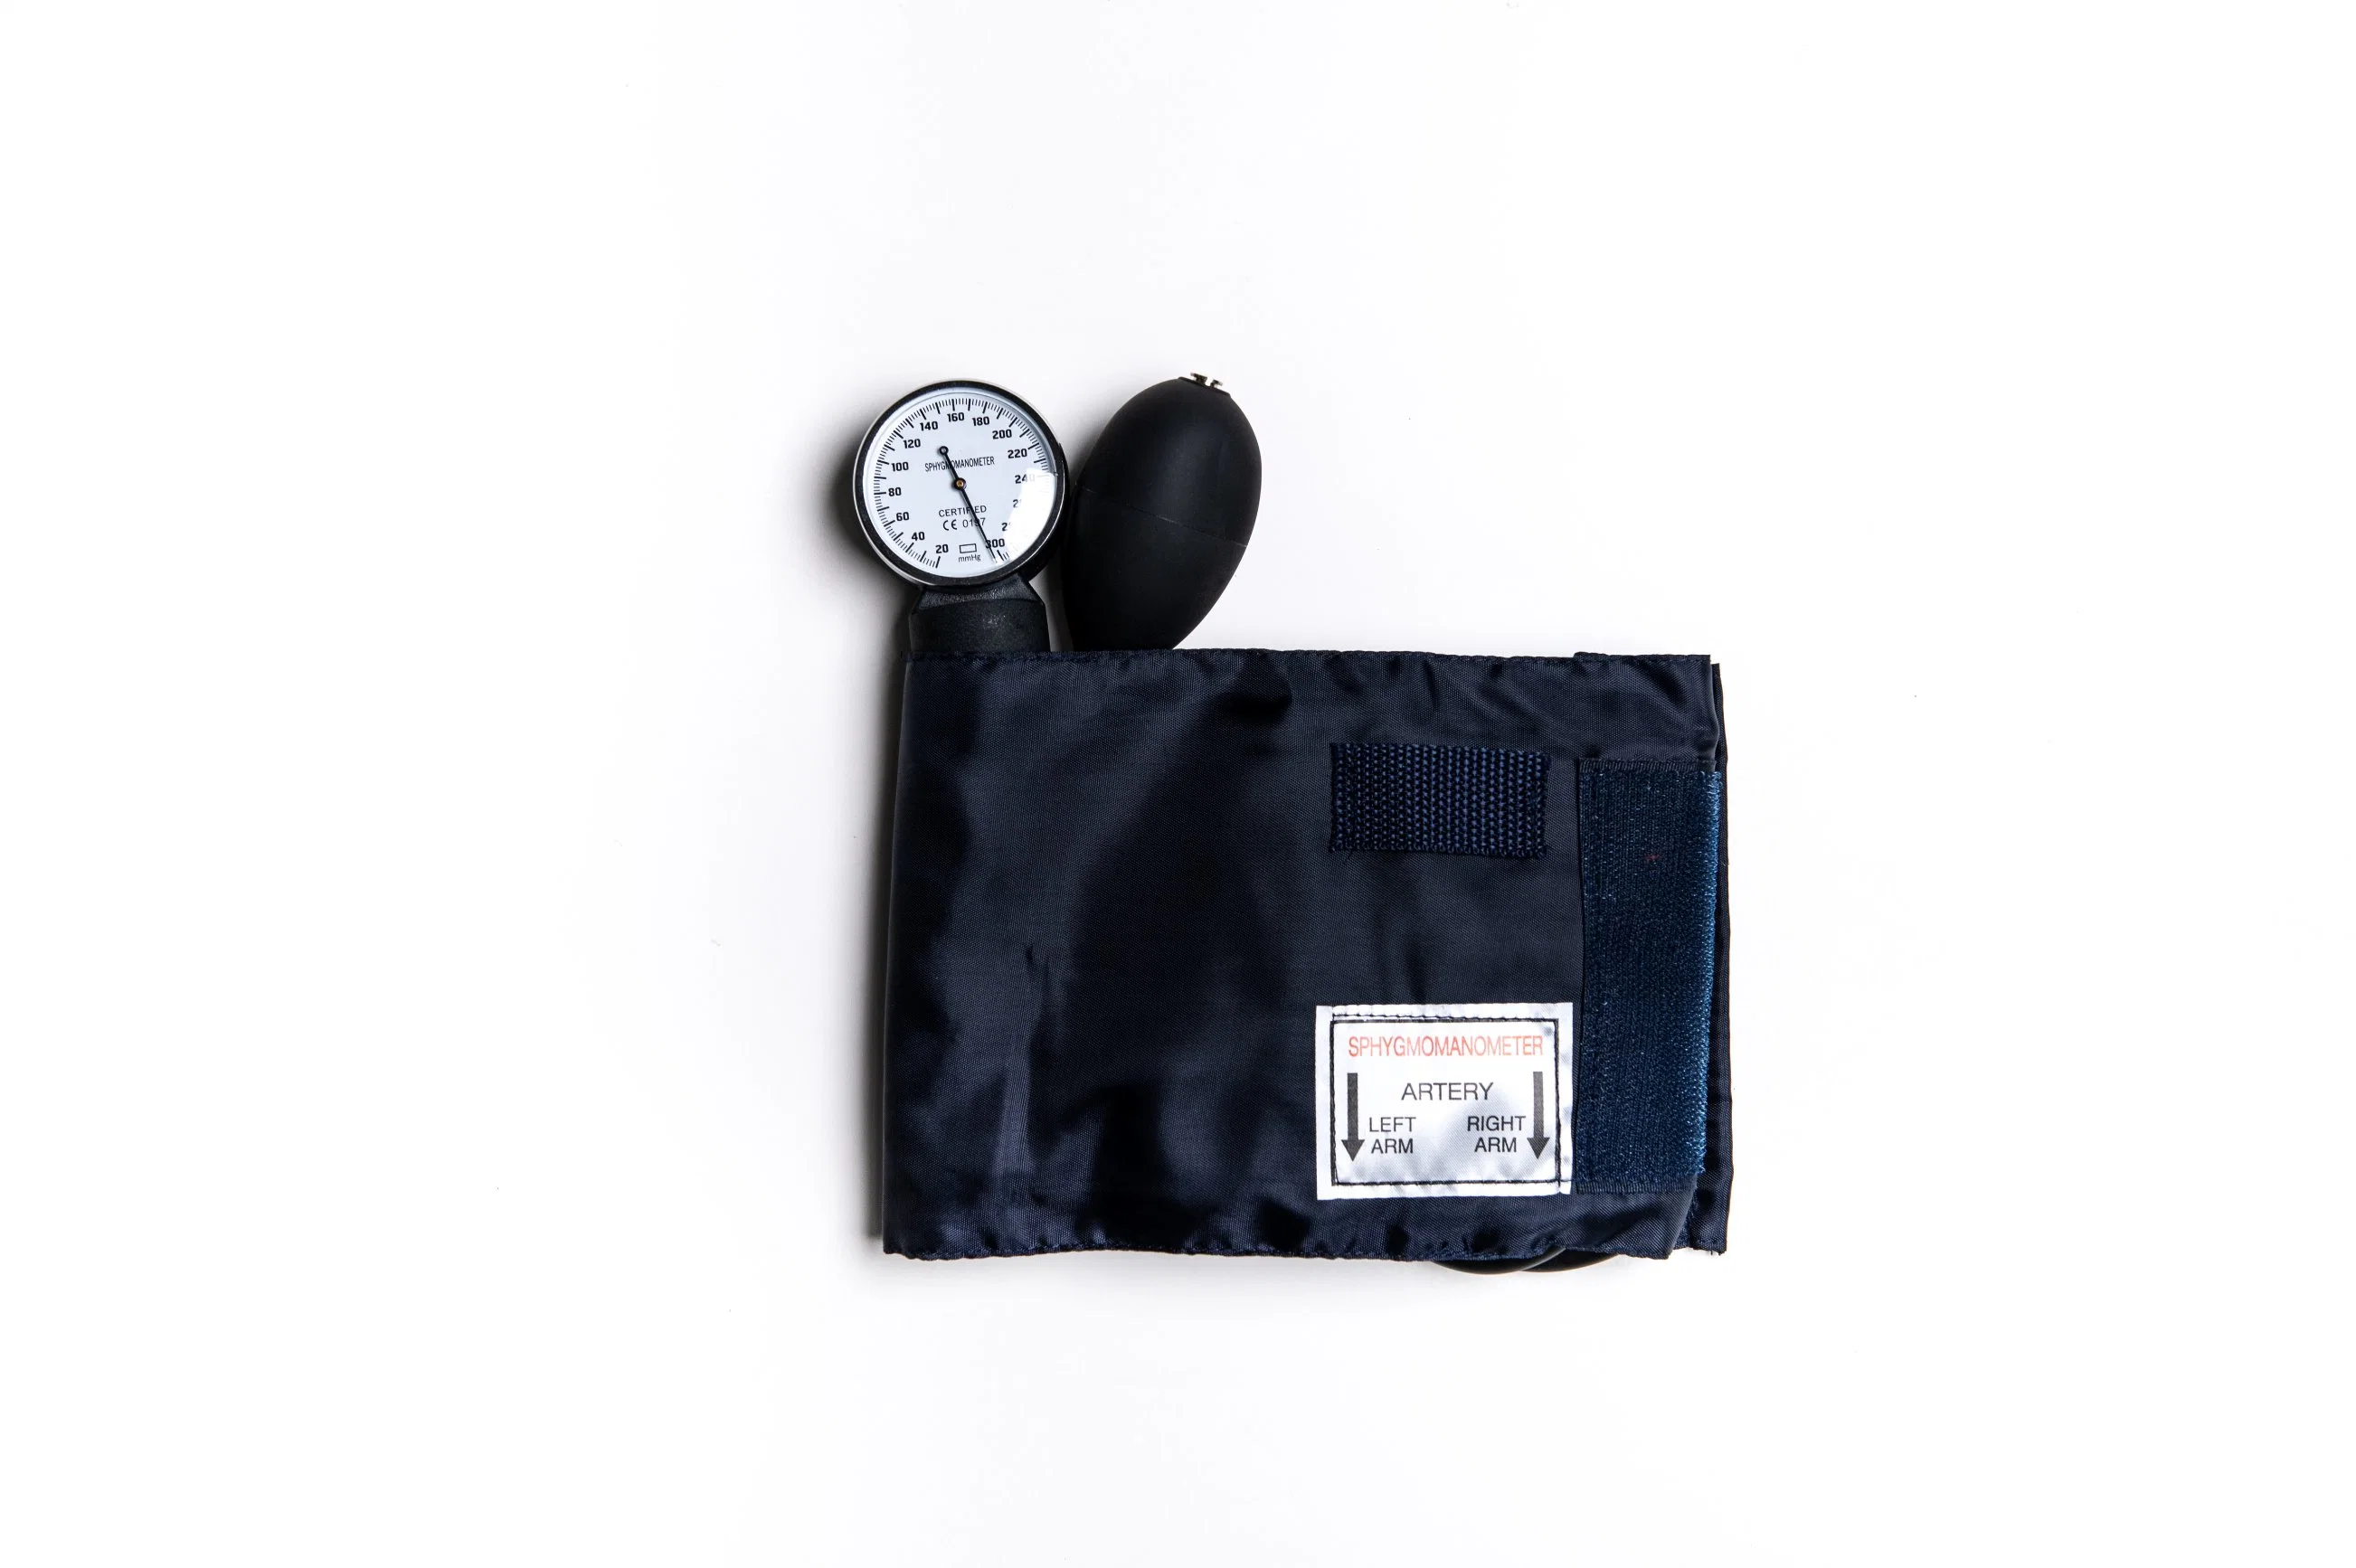 High Quality Medical Aneroid Sphygmomanometer with Stethoscope